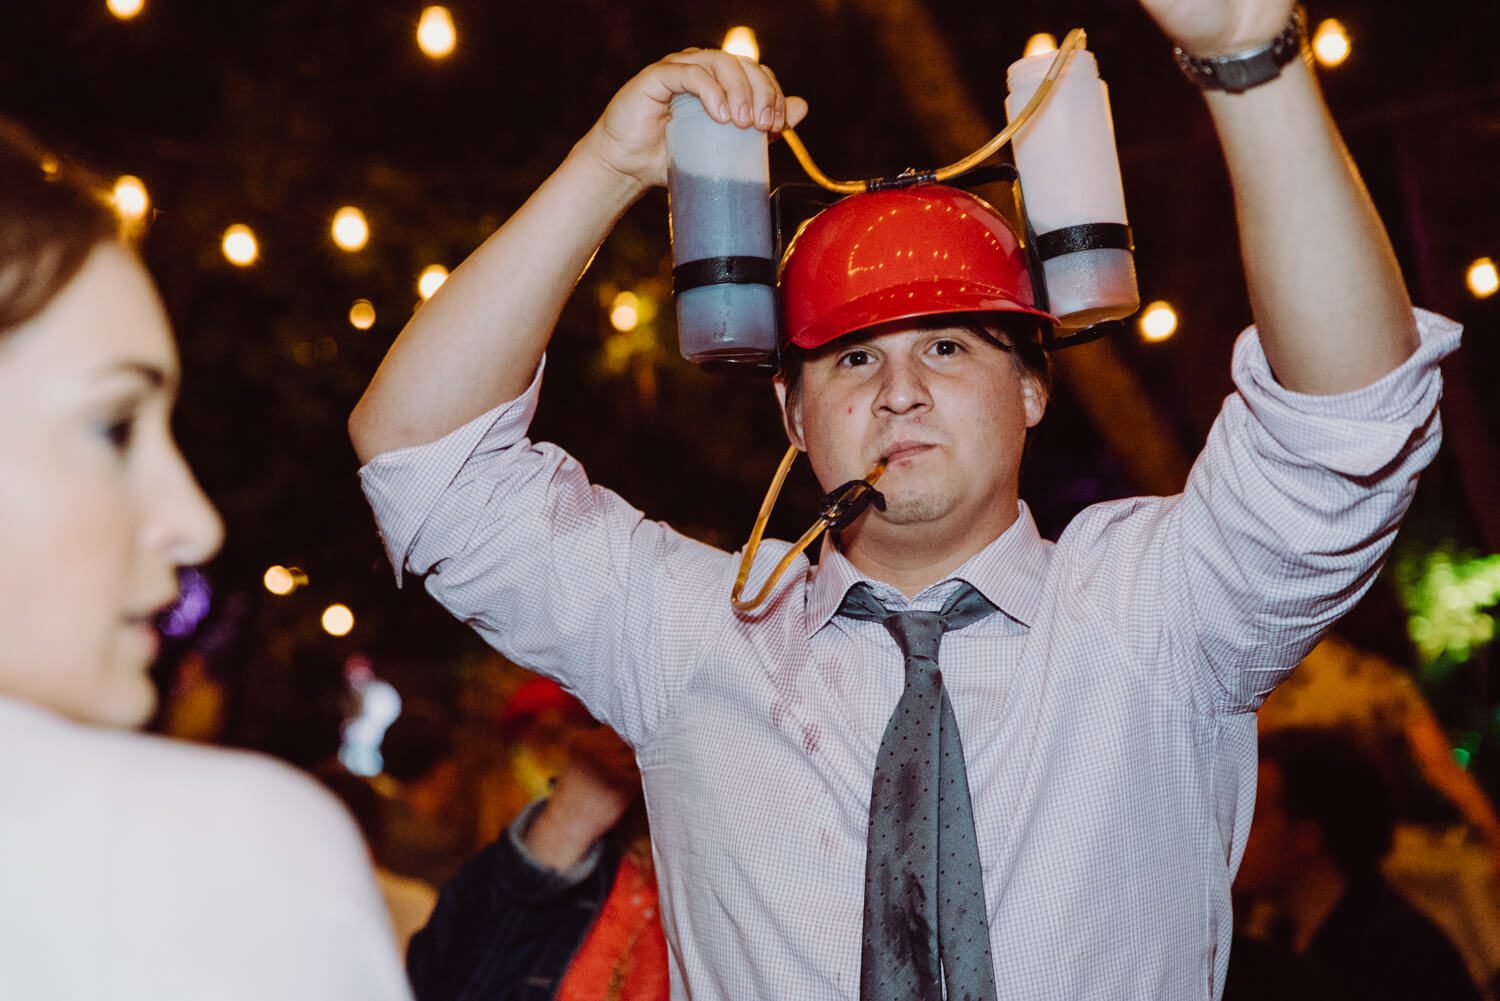 A man wearing a red hat at a party.